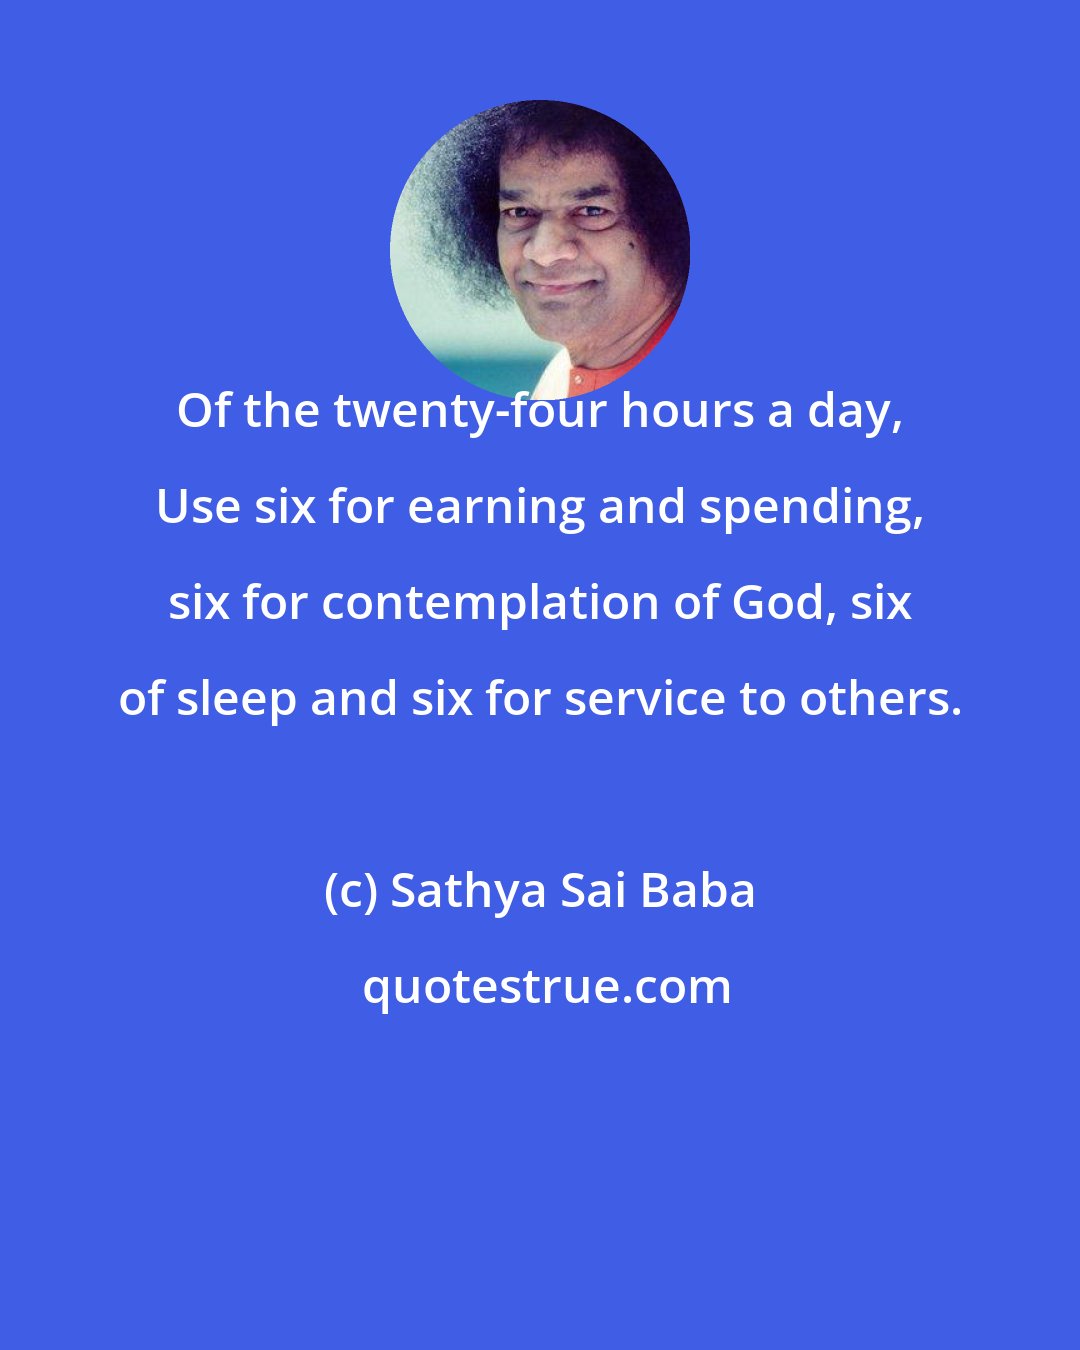 Sathya Sai Baba: Of the twenty-four hours a day, Use six for earning and spending, six for contemplation of God, six of sleep and six for service to others.